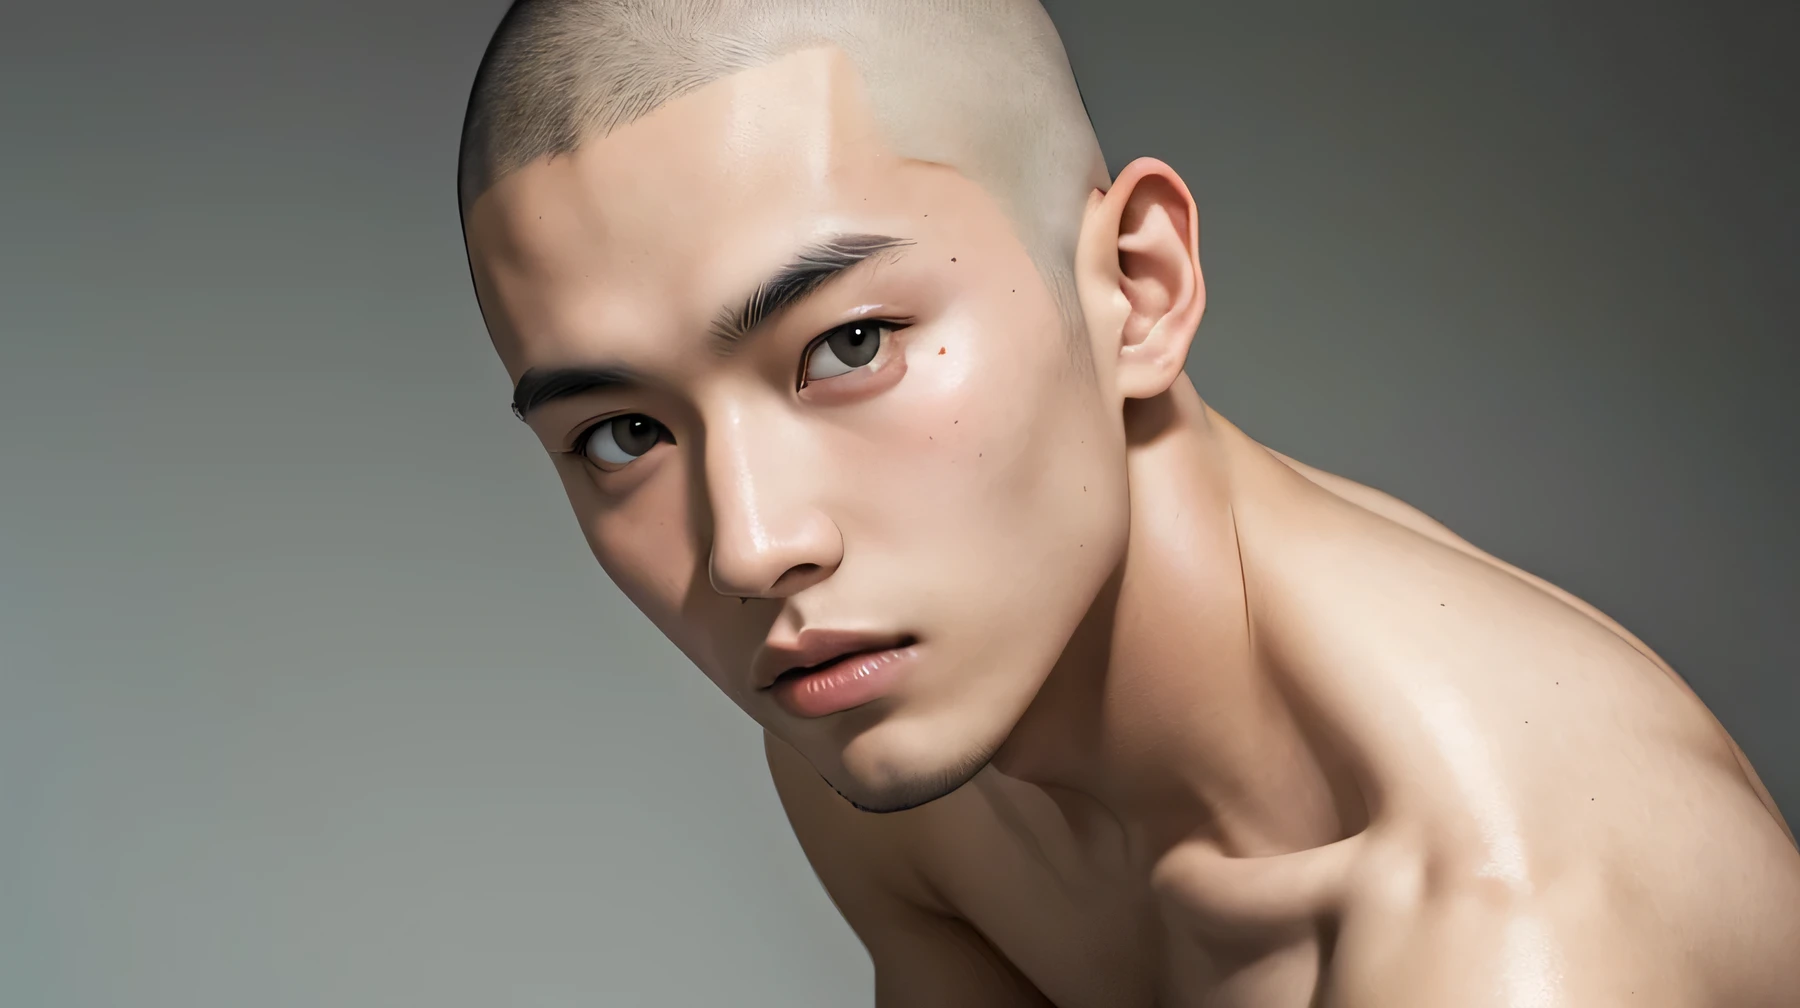 Handsome Japanese male model, 21 years old　Shaved head　Skinhead　Staring straight into the camera　Beautiful Skin　Nude from the shoulders up　ID photo　The whole head fits in　　Gray tone plain background